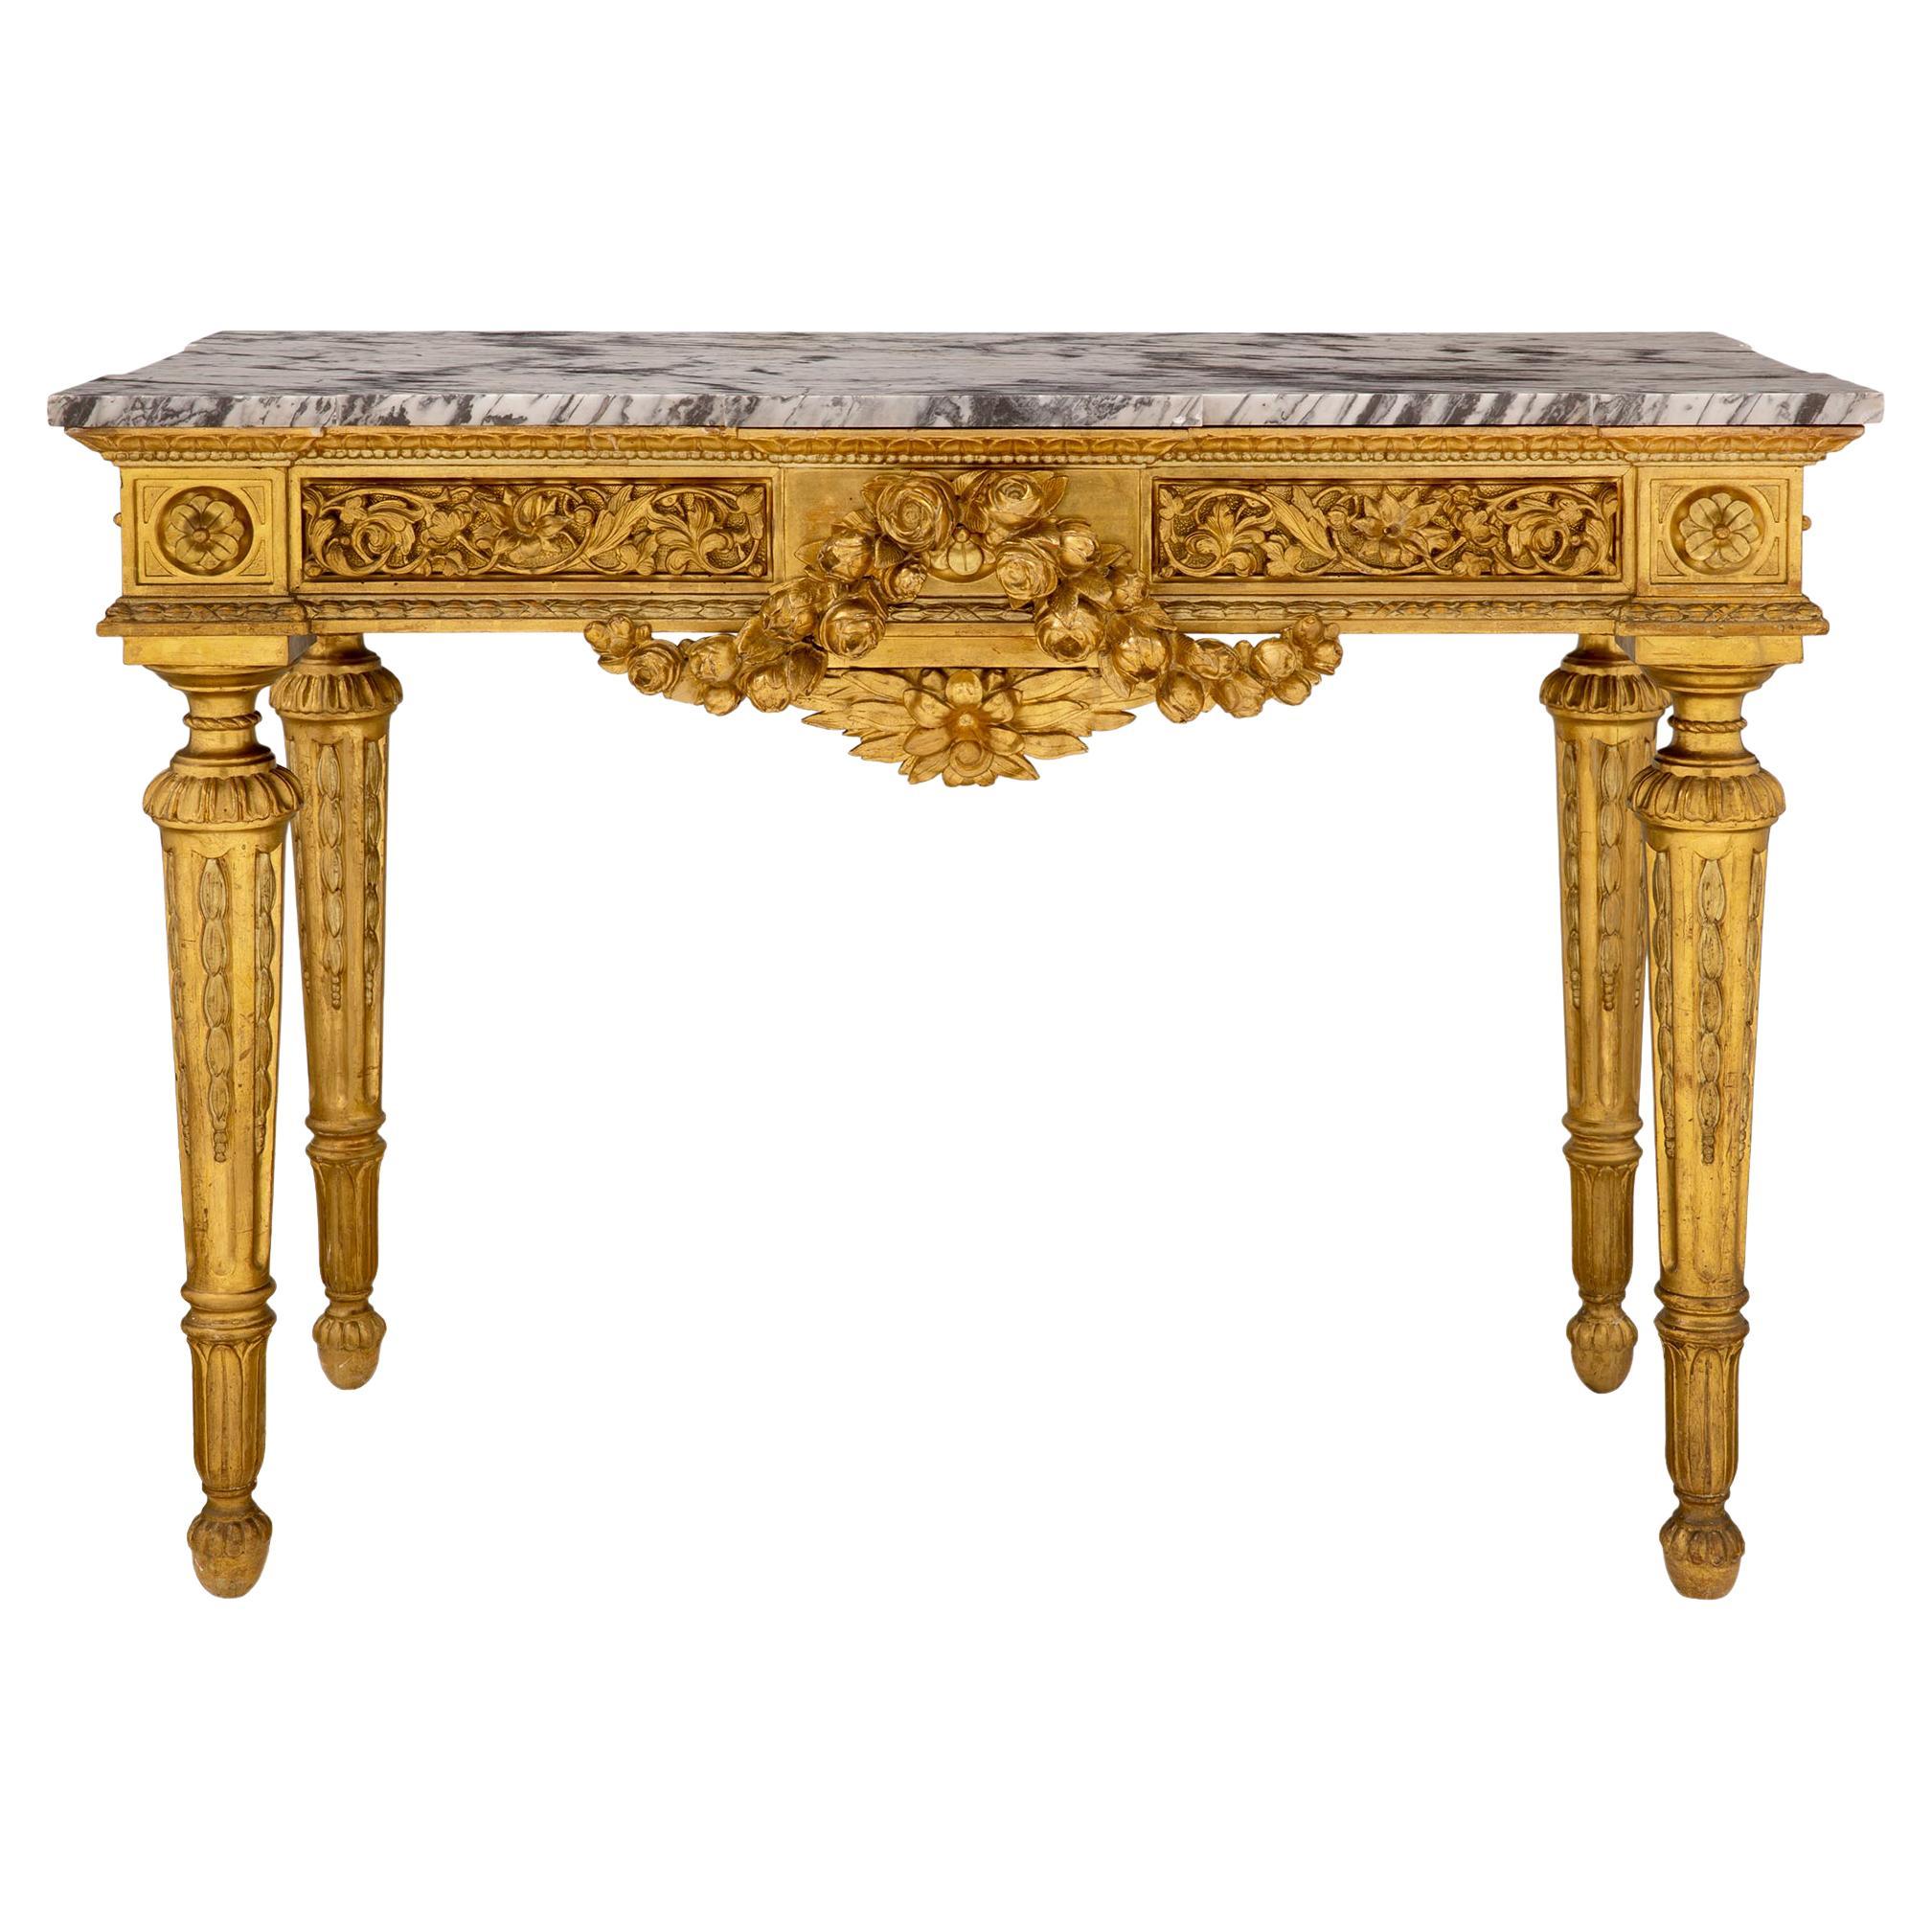 French 19th Century Louis XVI Style Giltwood and Marble Freestanding Console